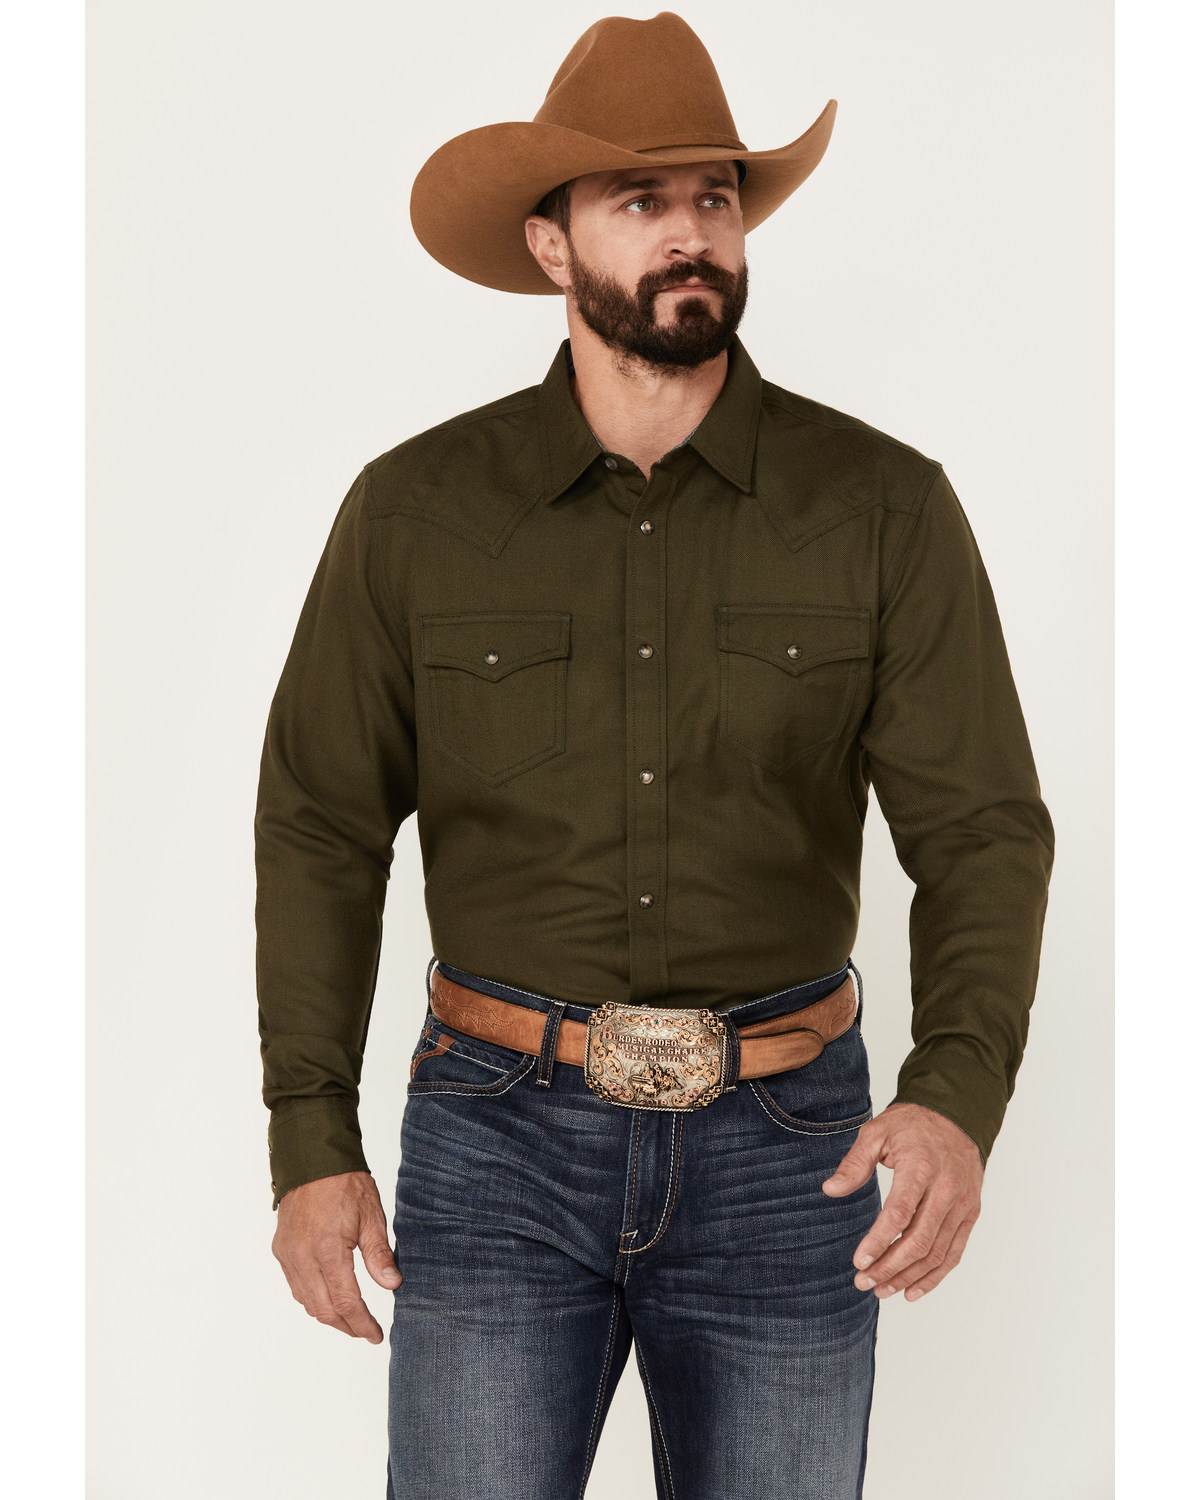 Cody James Men's Wooly Mammoth Solid Long Sleeve Snap Western Shirt